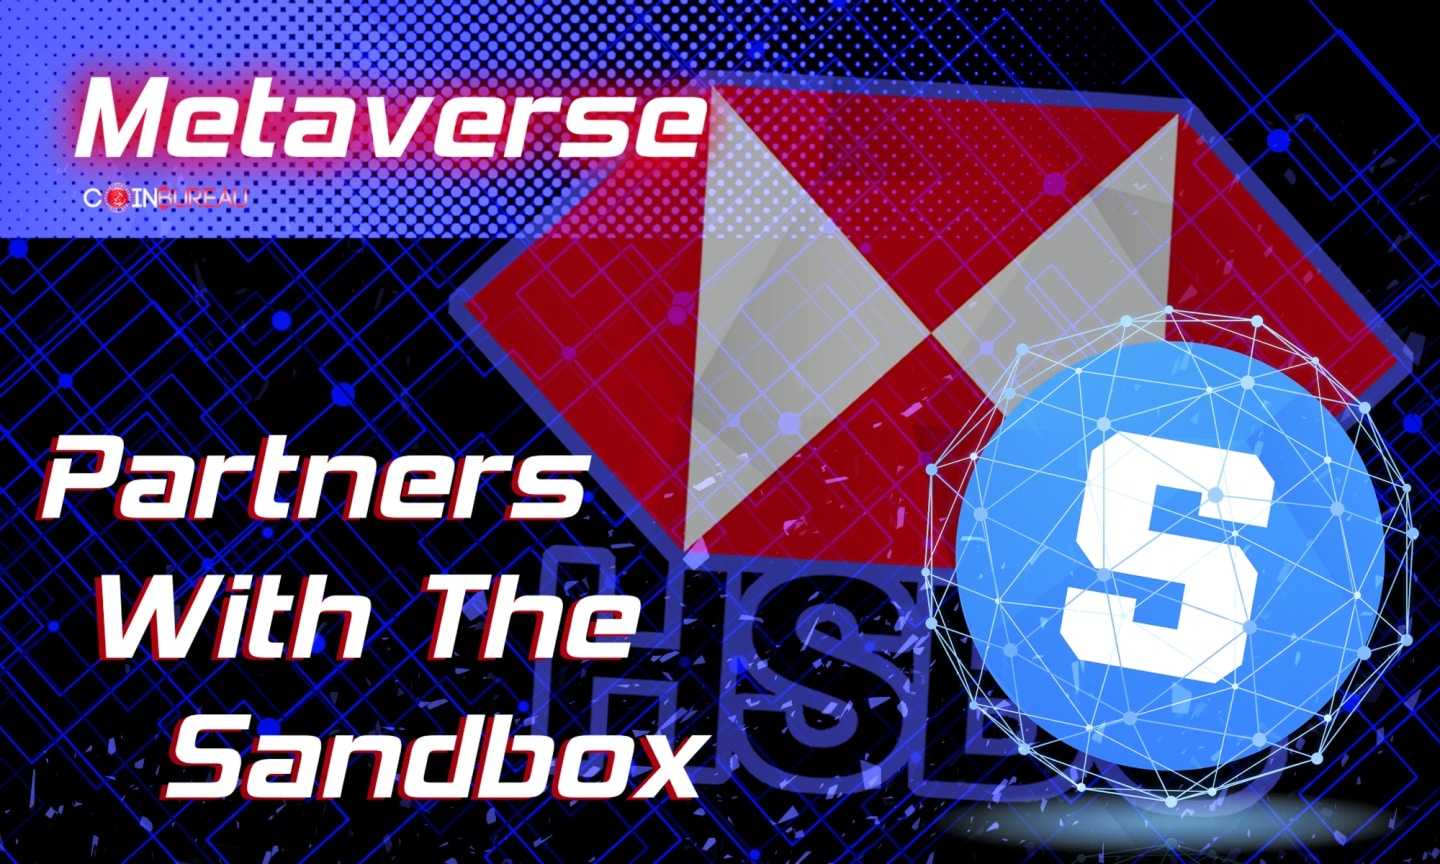 Banking Giant HSBC Partners With The Sandbox in Move to The Metaverse